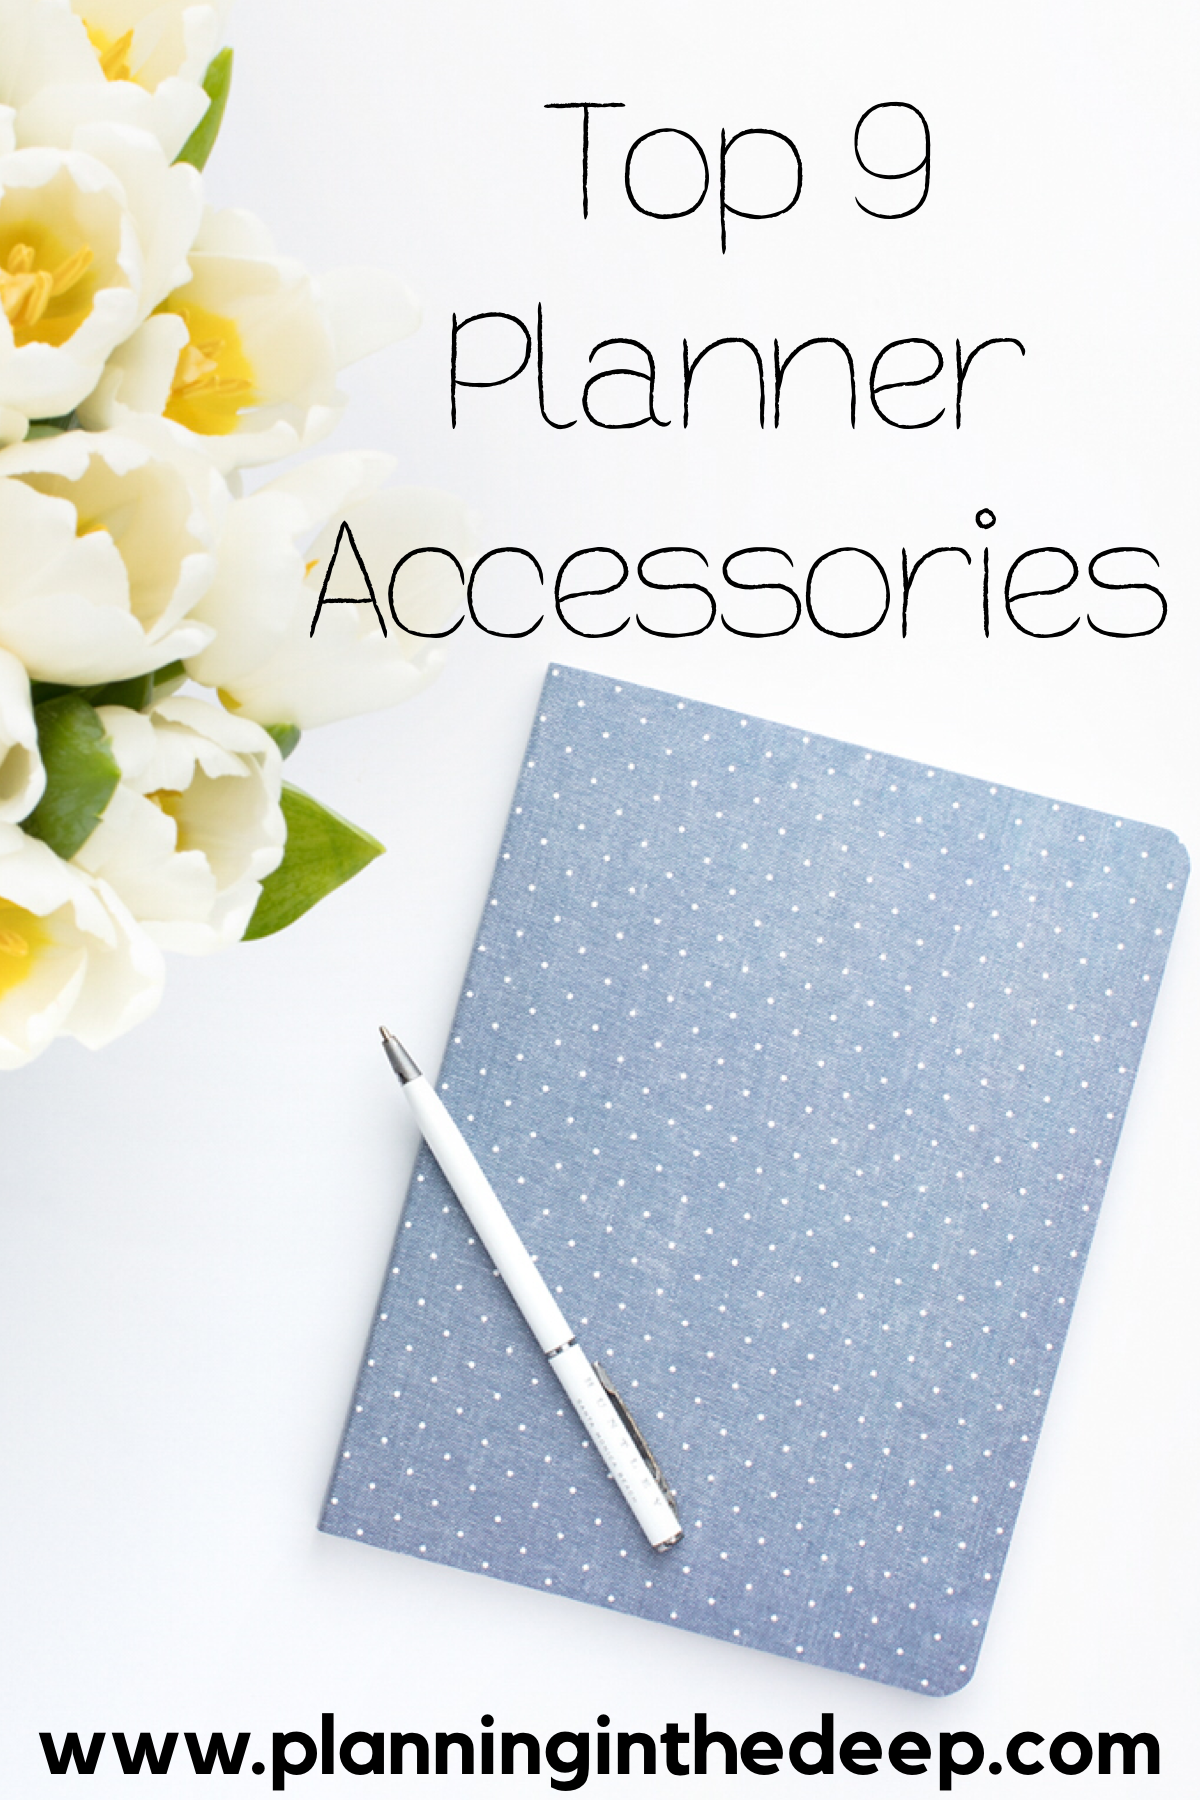 Paper Planning, Productivity and Homemaking Advice. — Planning In The Deep